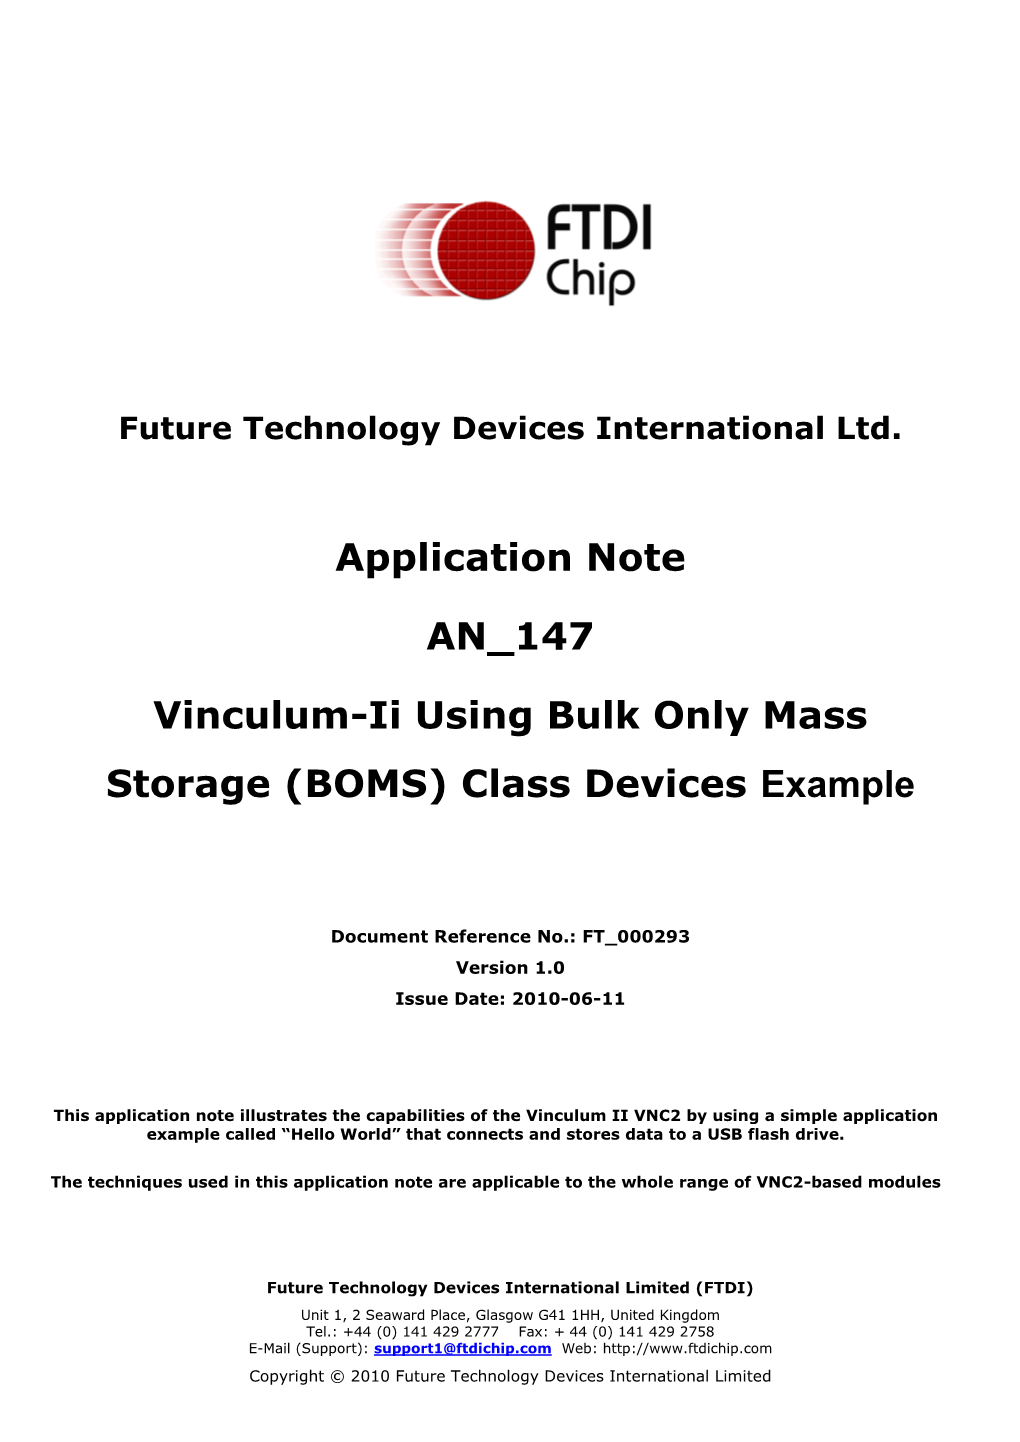 Vinculum-Ii Using Bulk Only Mass Storage (BOMS) Class Devices Example